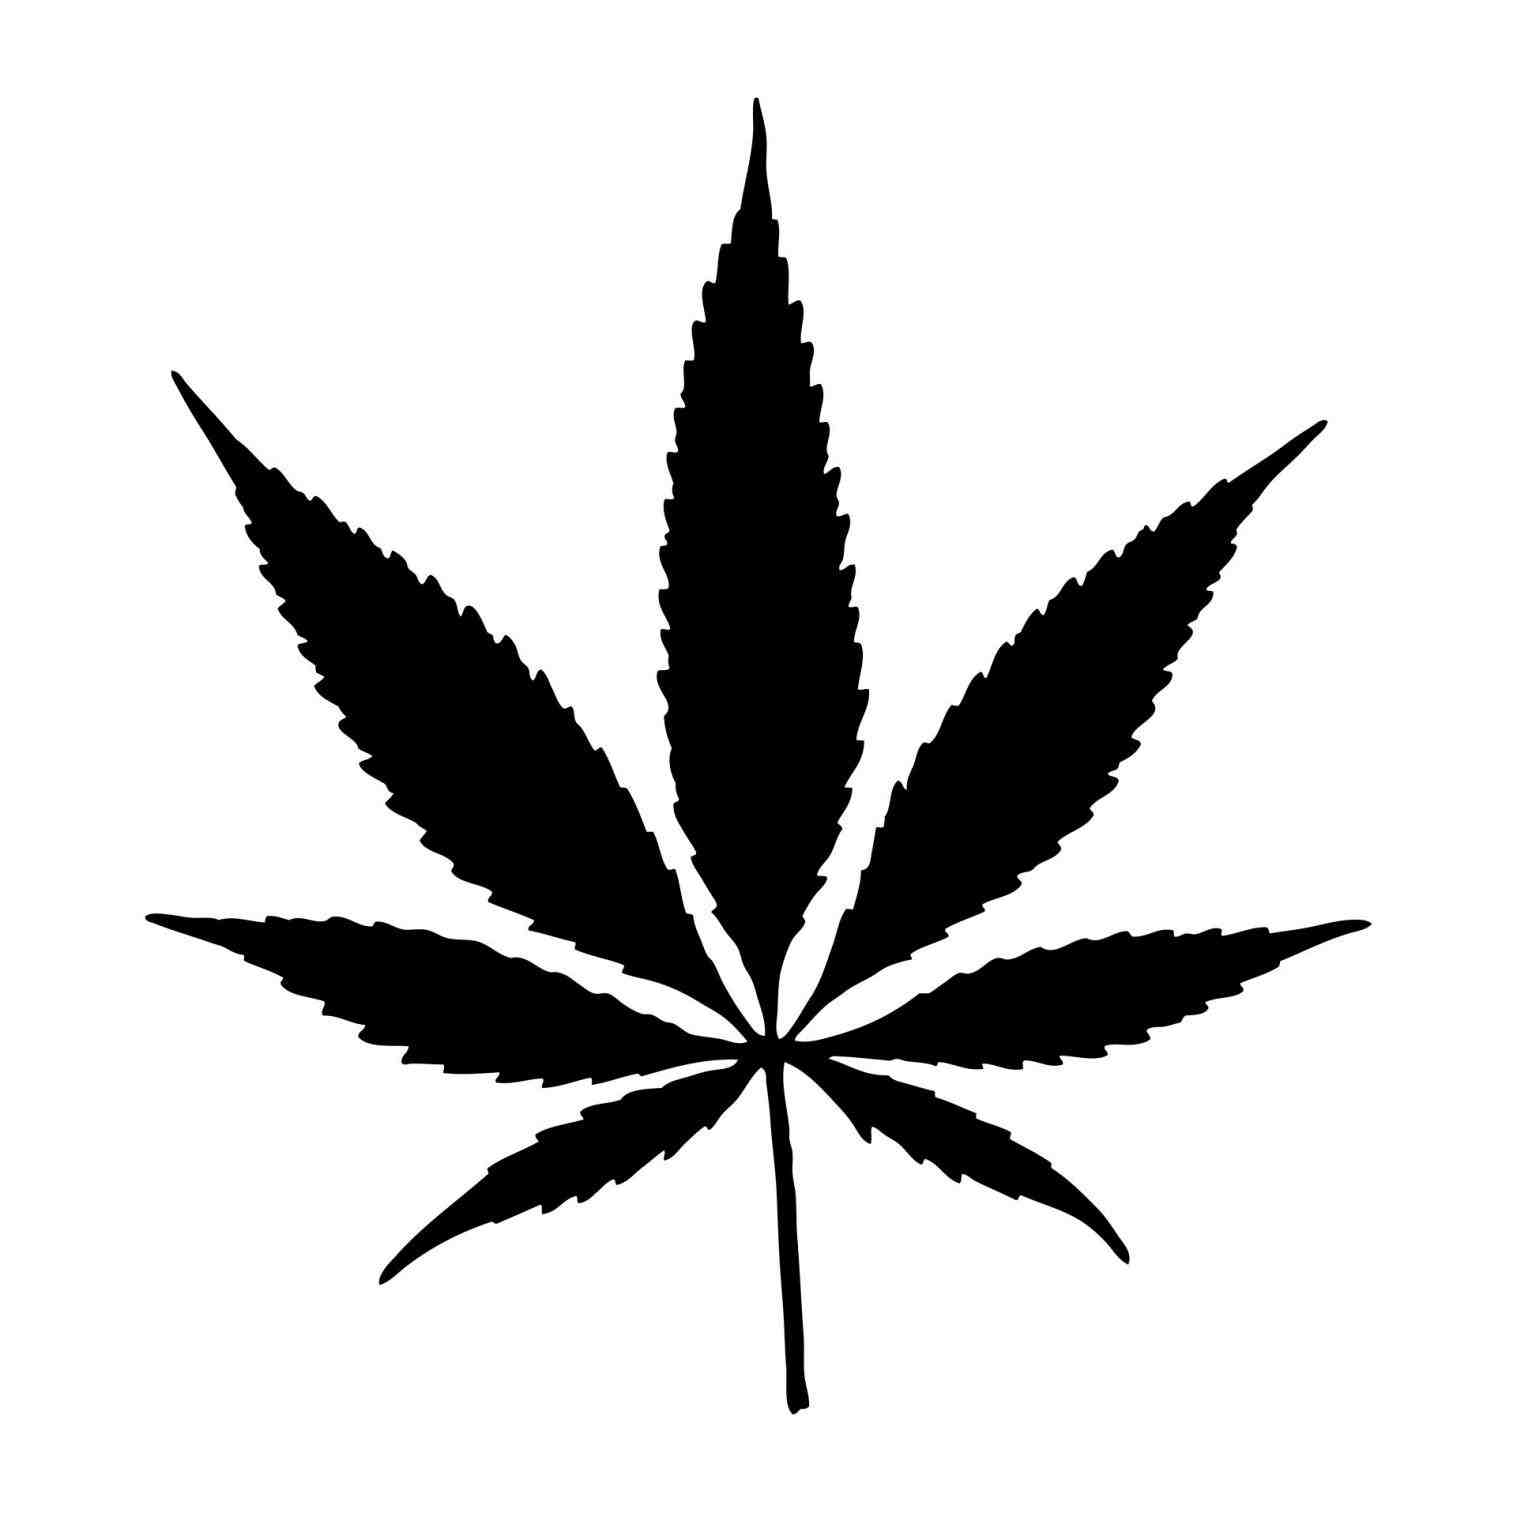 cool drawings of weed leafs › copay.online